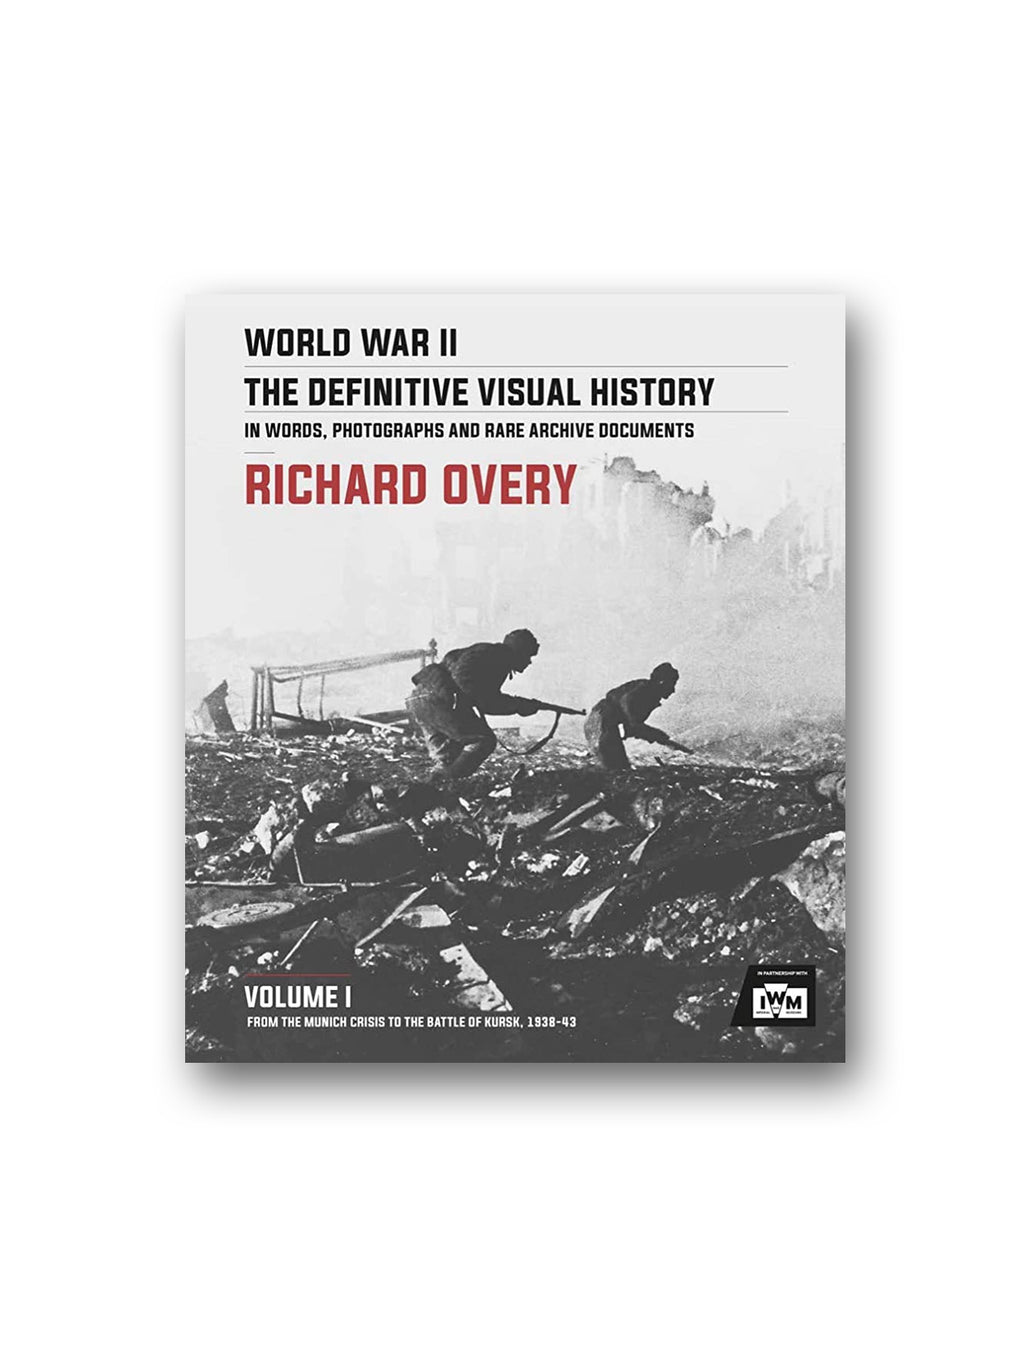 World War II: The Essential History, Volume 1 : From the Munich Crisis to the Battle of Kursk 1938-43